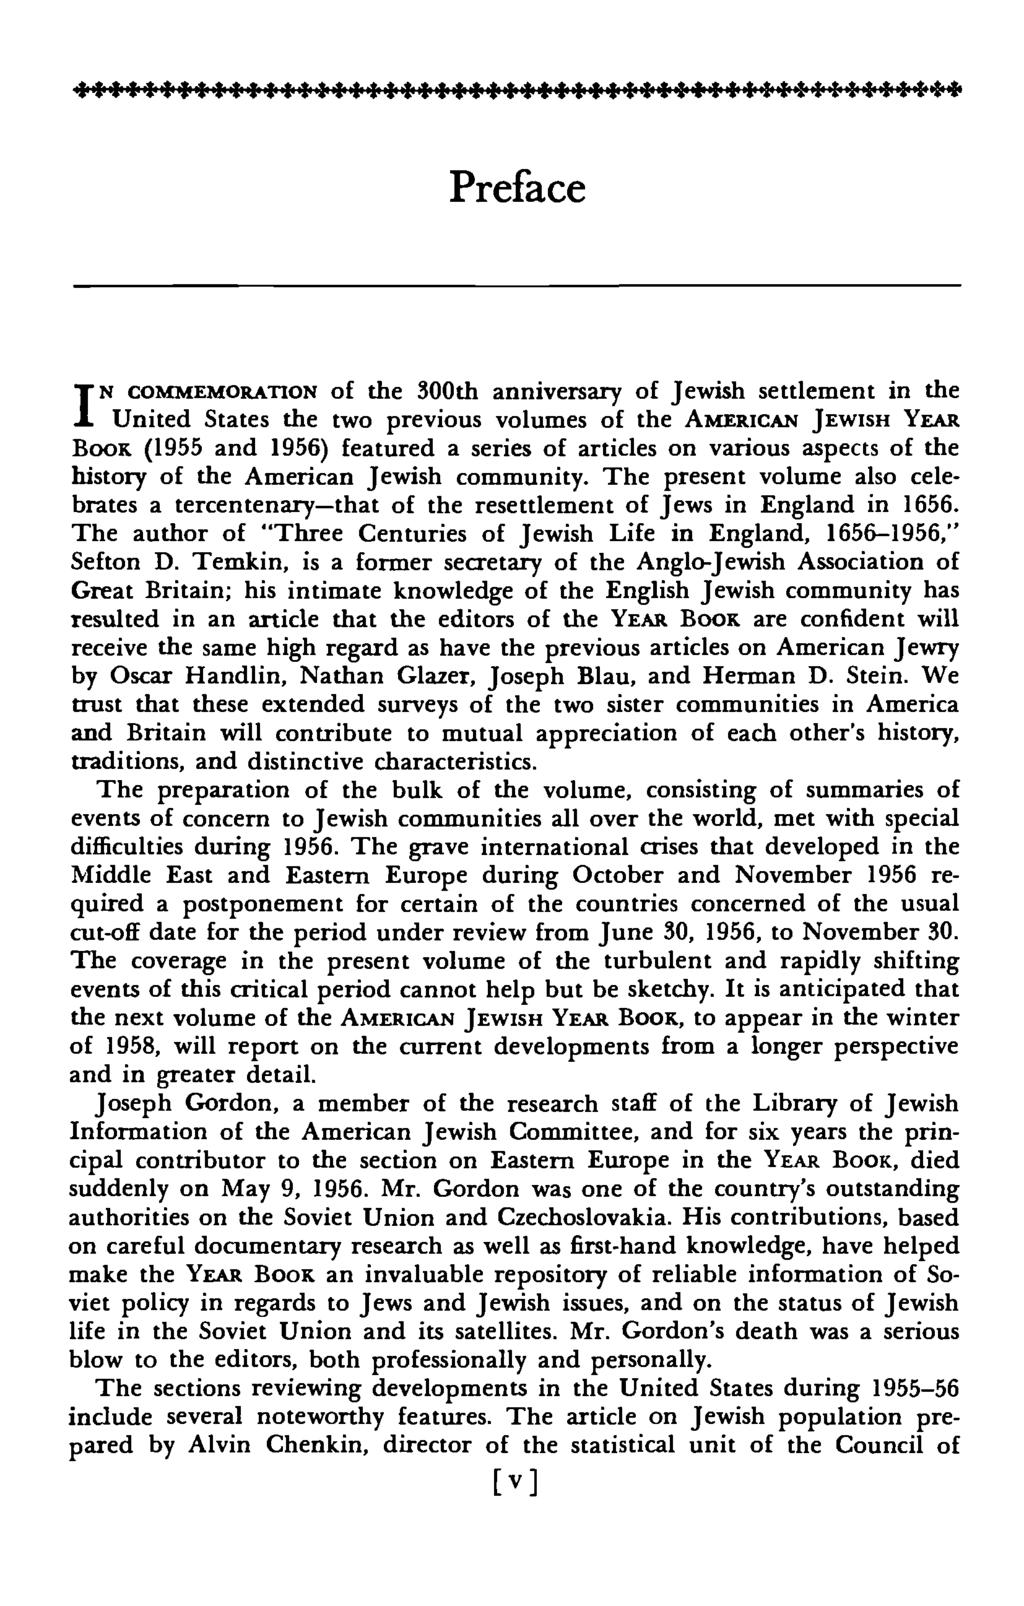 Preface I N COMMEMORATION of the 300th anniversary of Jewish settlement in the United States the two previous volumes of the AMERICAN JEWISH YEAR BOOK (1955 and 1956) featured a series of articles on